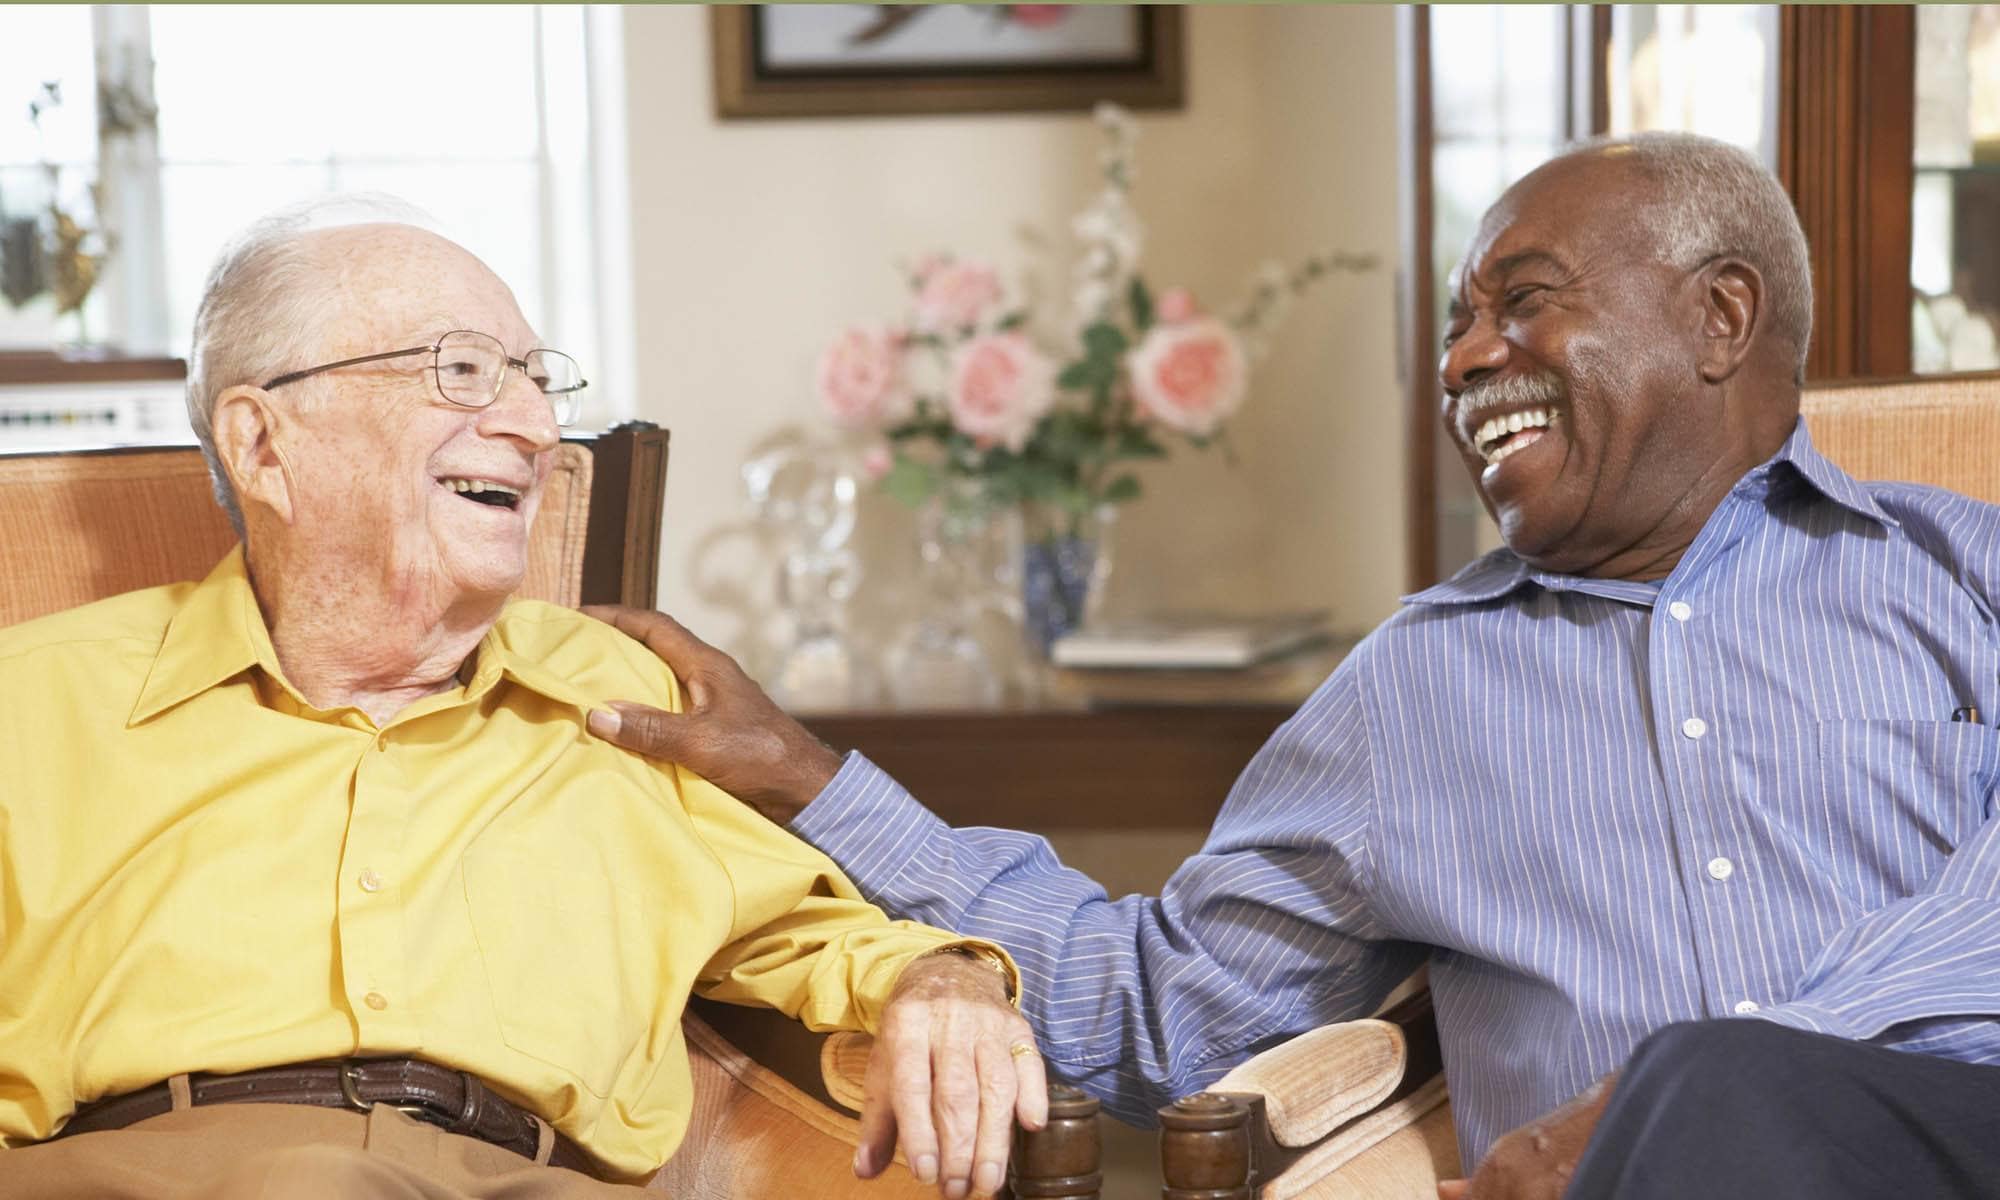 What Does “Level of Care” Mean in Assisted Living Facilities?